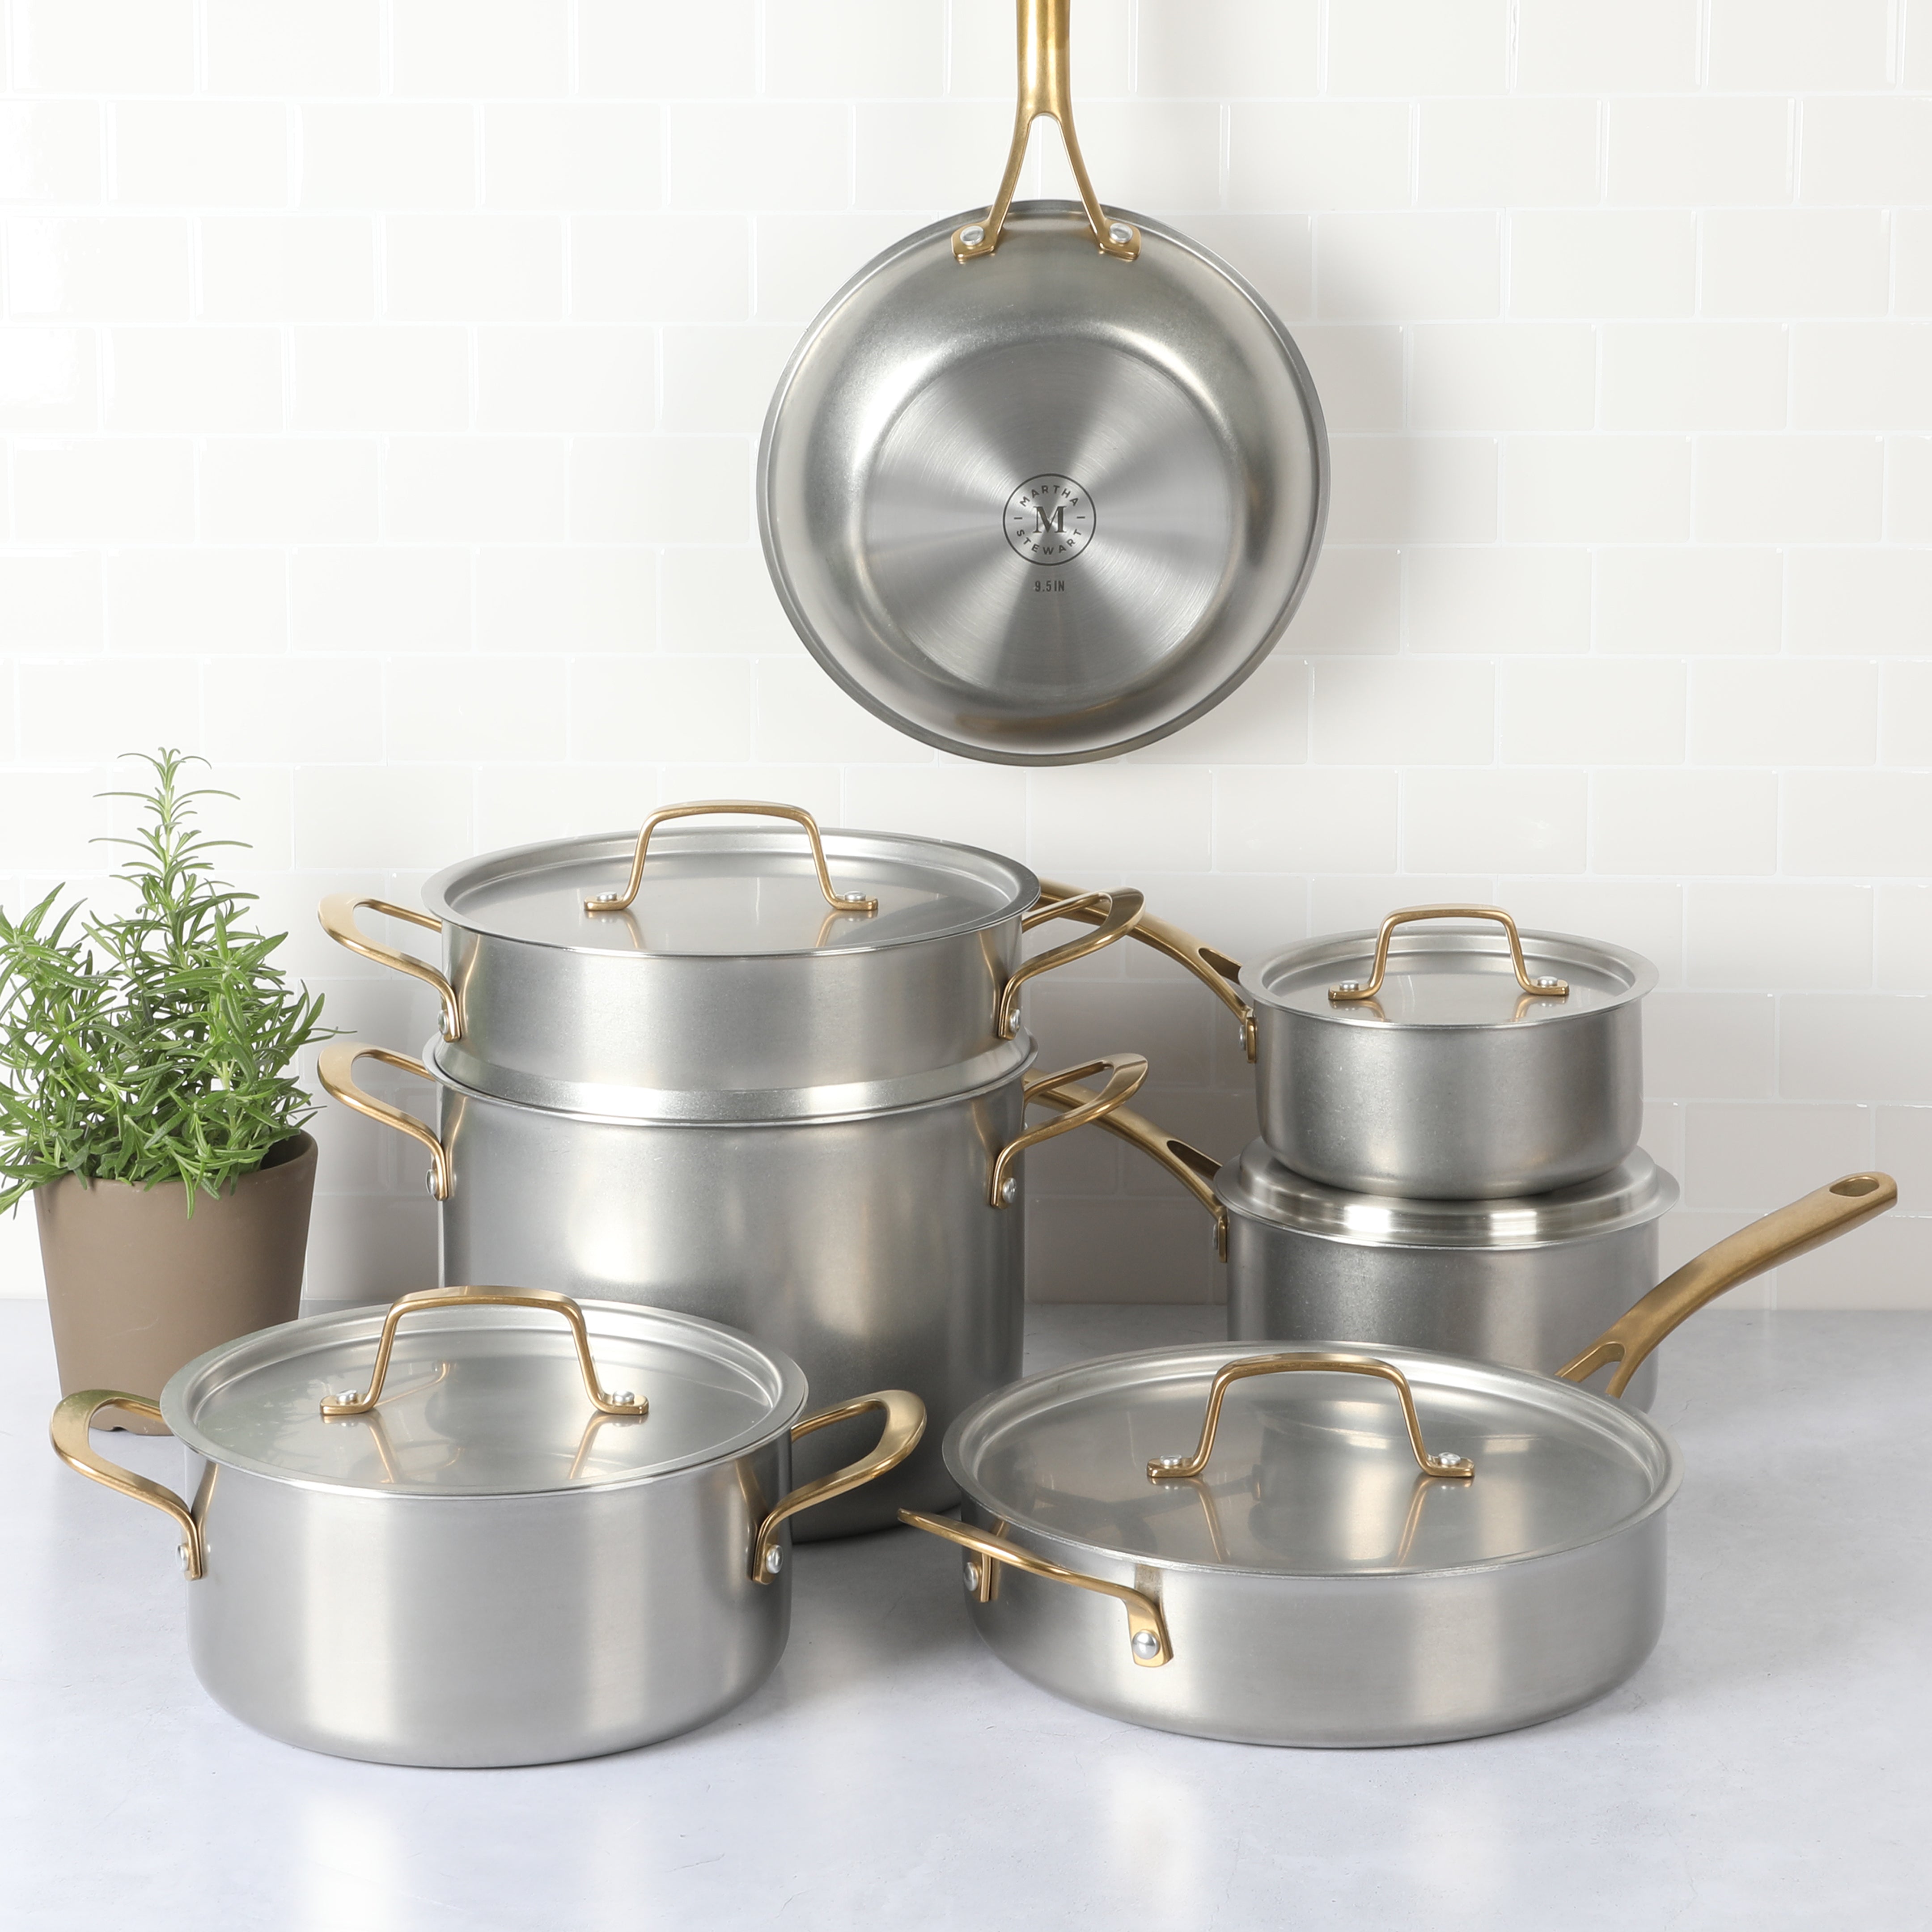 Martha Stewart Castelle 10 Piece 18/8 Stainless Steel Induction Safe Pots  and Pans Non-Toxic Cookware Set